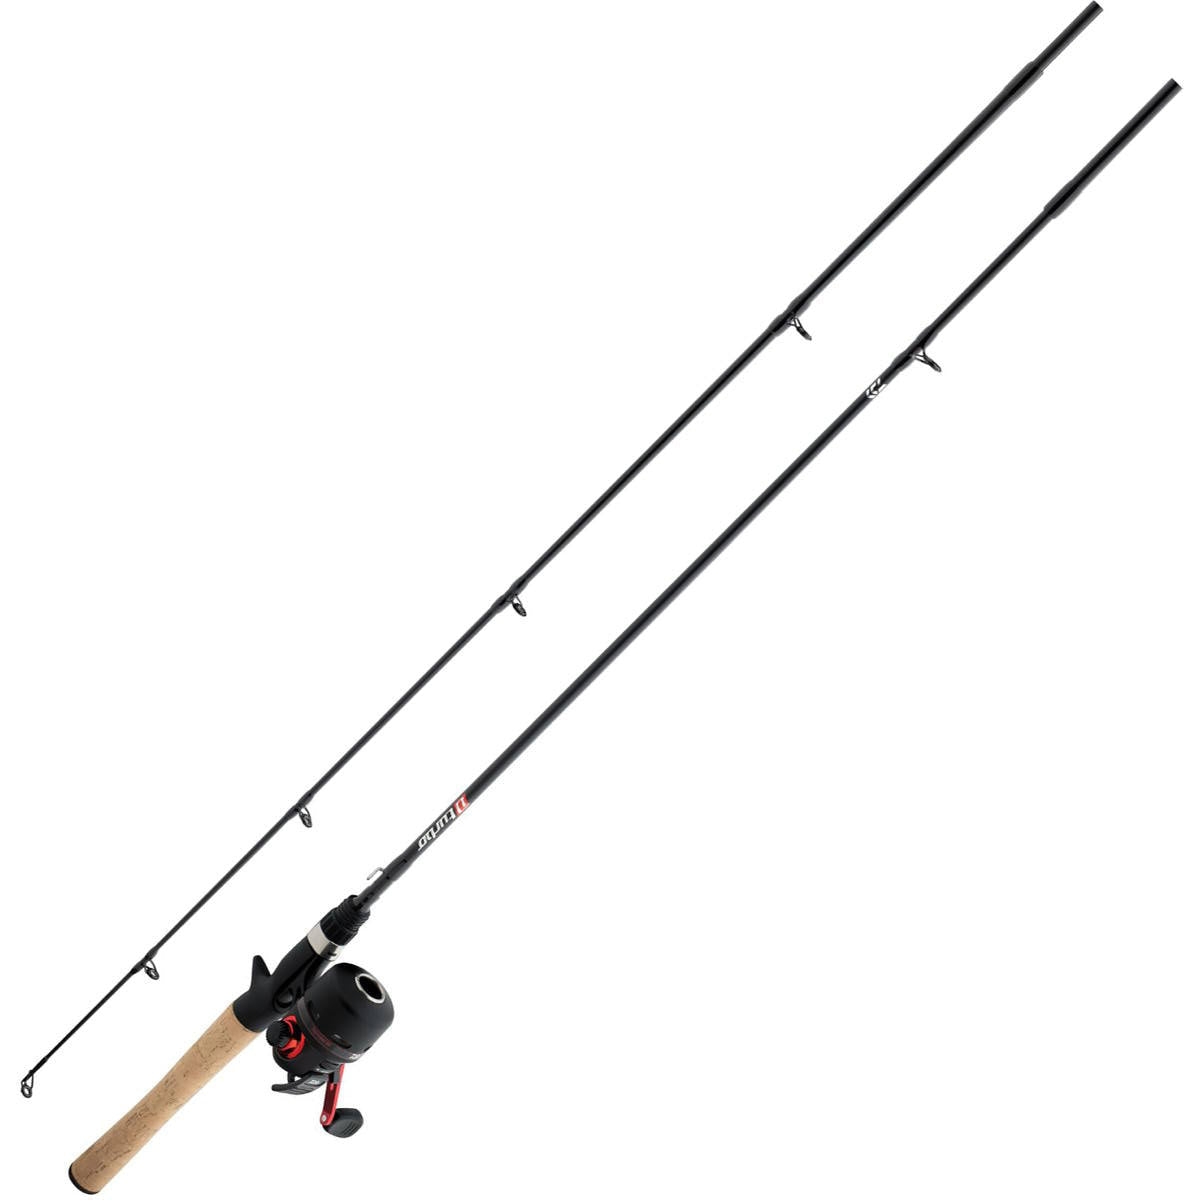 Photo of Daiwa D-Turbo Spincast Reel and Fiberglass Rod Combo for sale at United Tackle Shops.